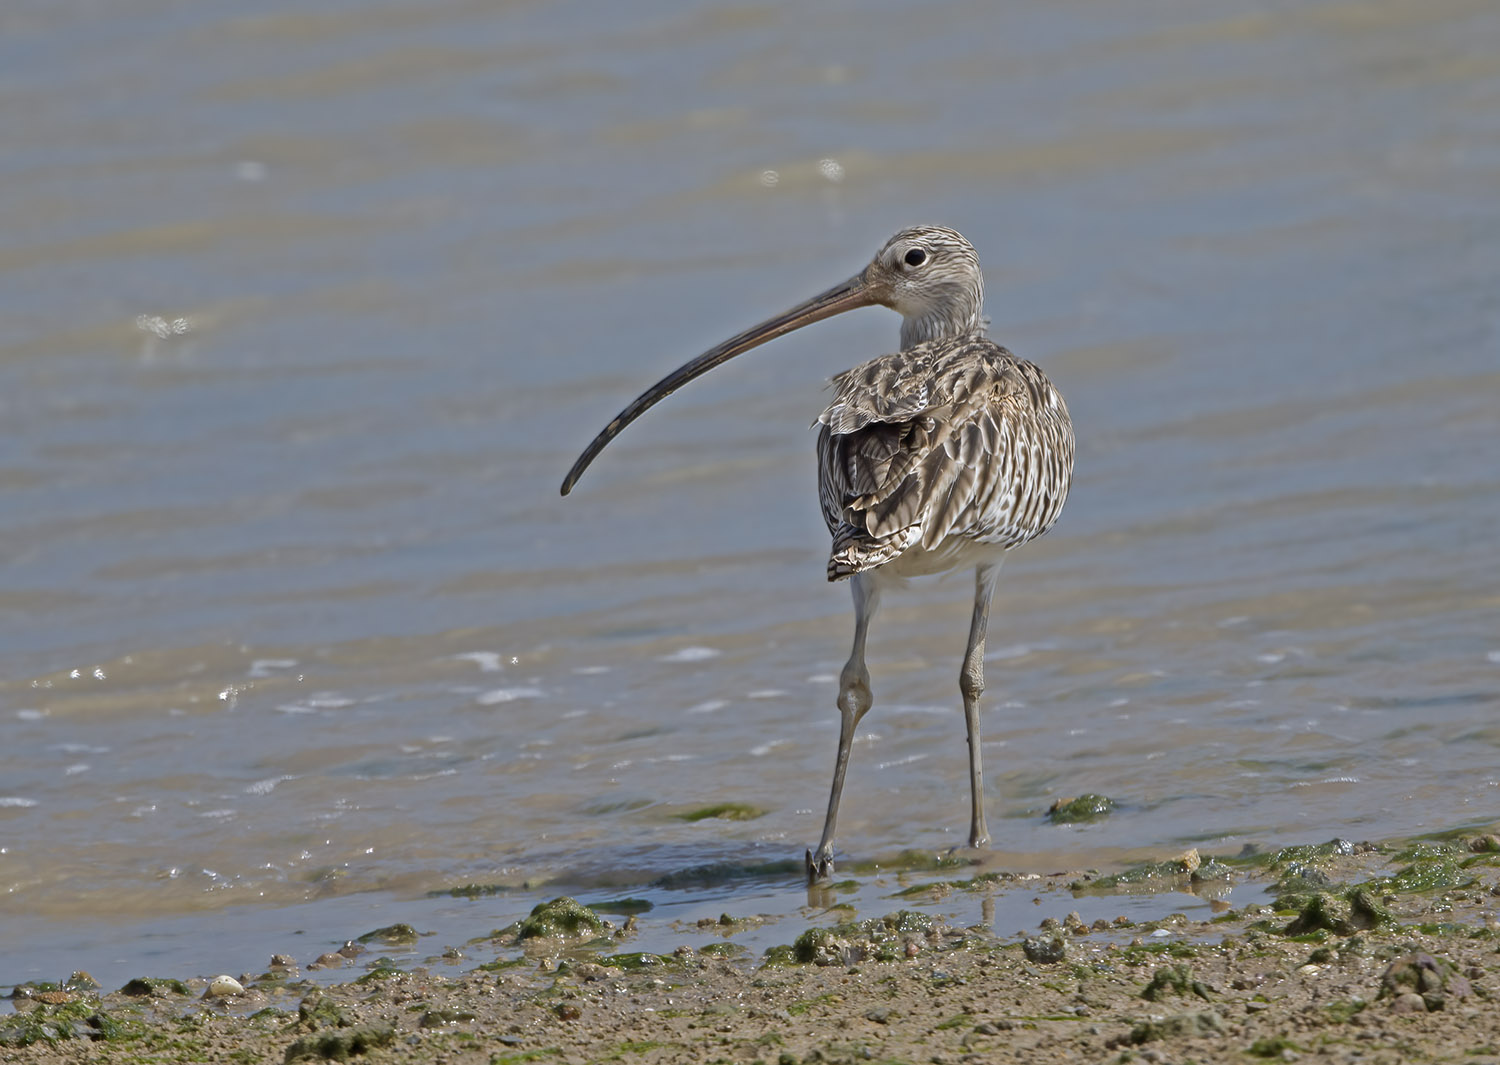 Eurasian Curlew at P. Tekong on 15 Oct 2022. Photo credit: Frankie Cheong